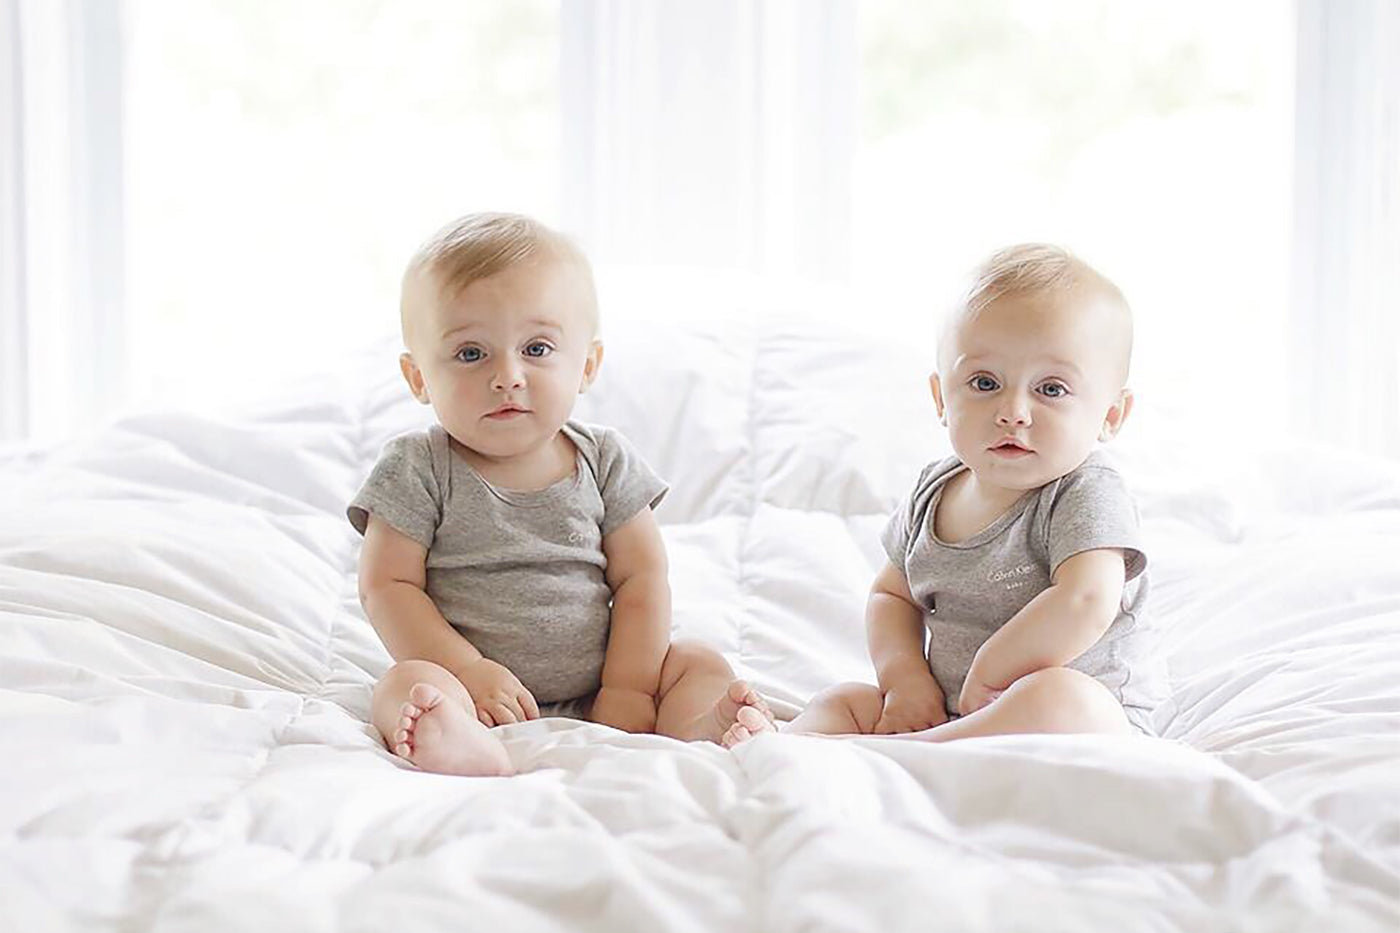 Adorable 3 months old twins - Babies Are Beautiful